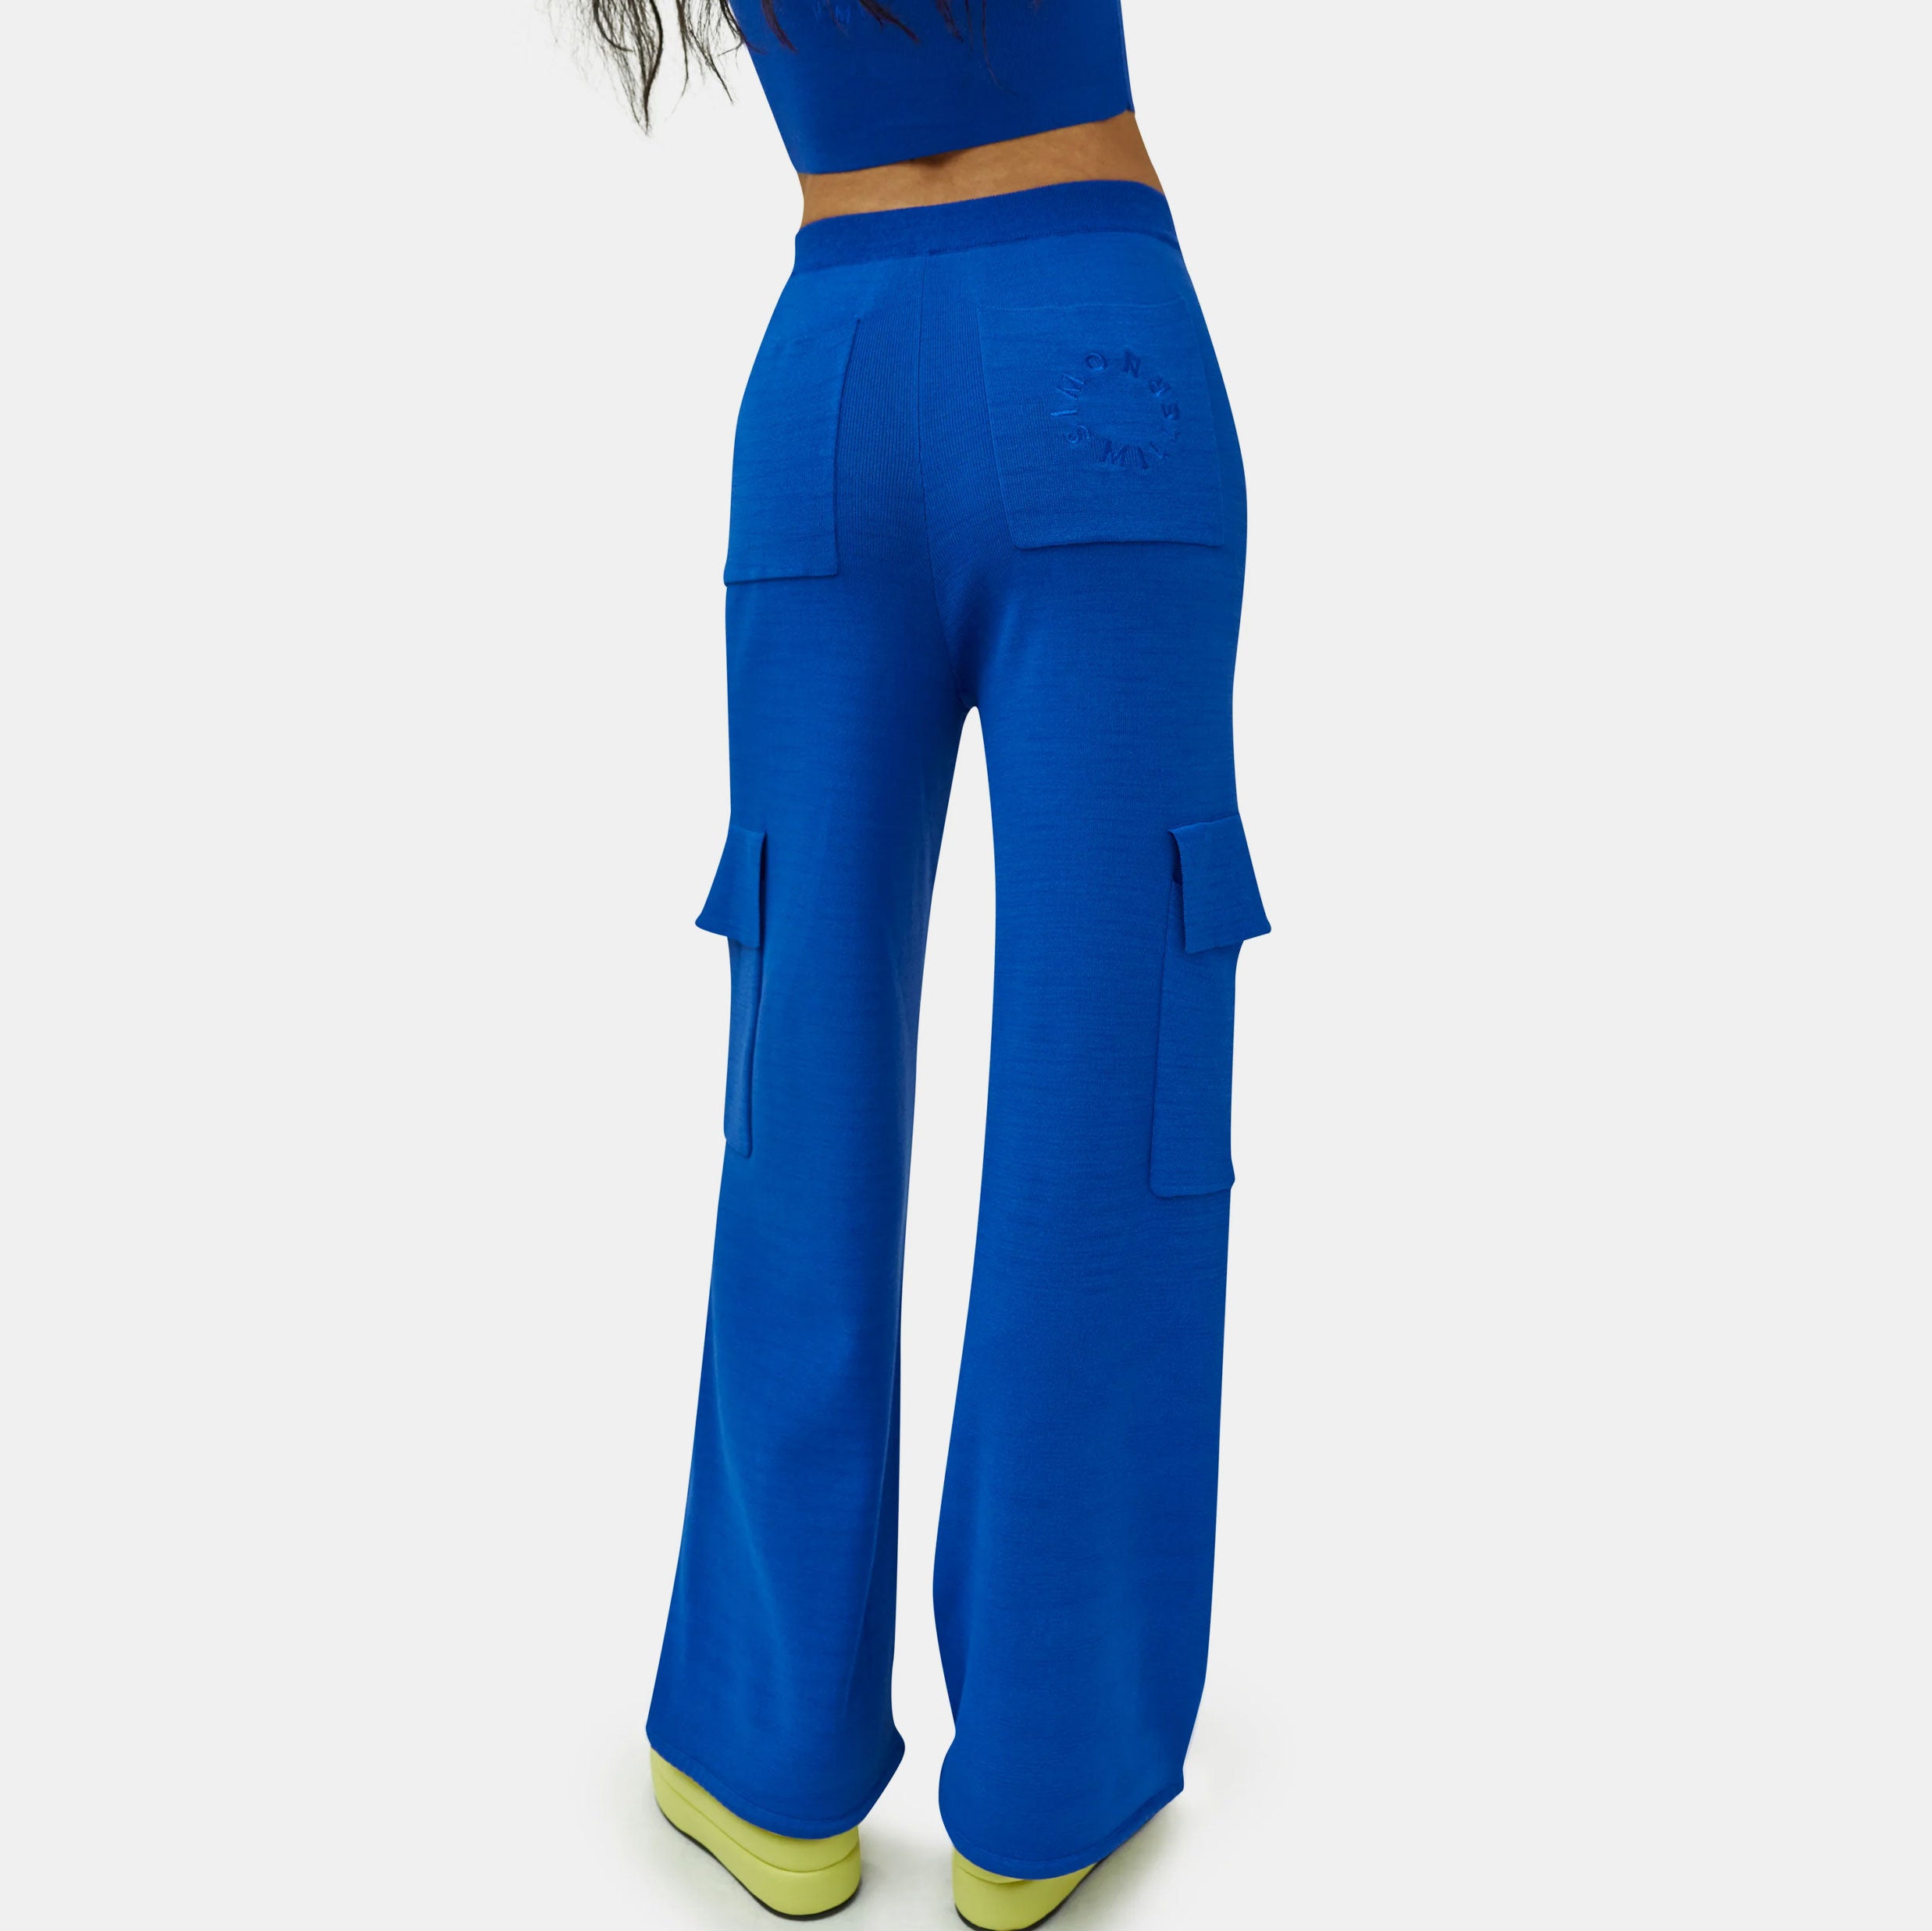 Close detail half body photo of the model wearing the Hesby Pant - a vibrant blue knit wide leg pant with side cargo-style pockets and a button & zip closure - back view.